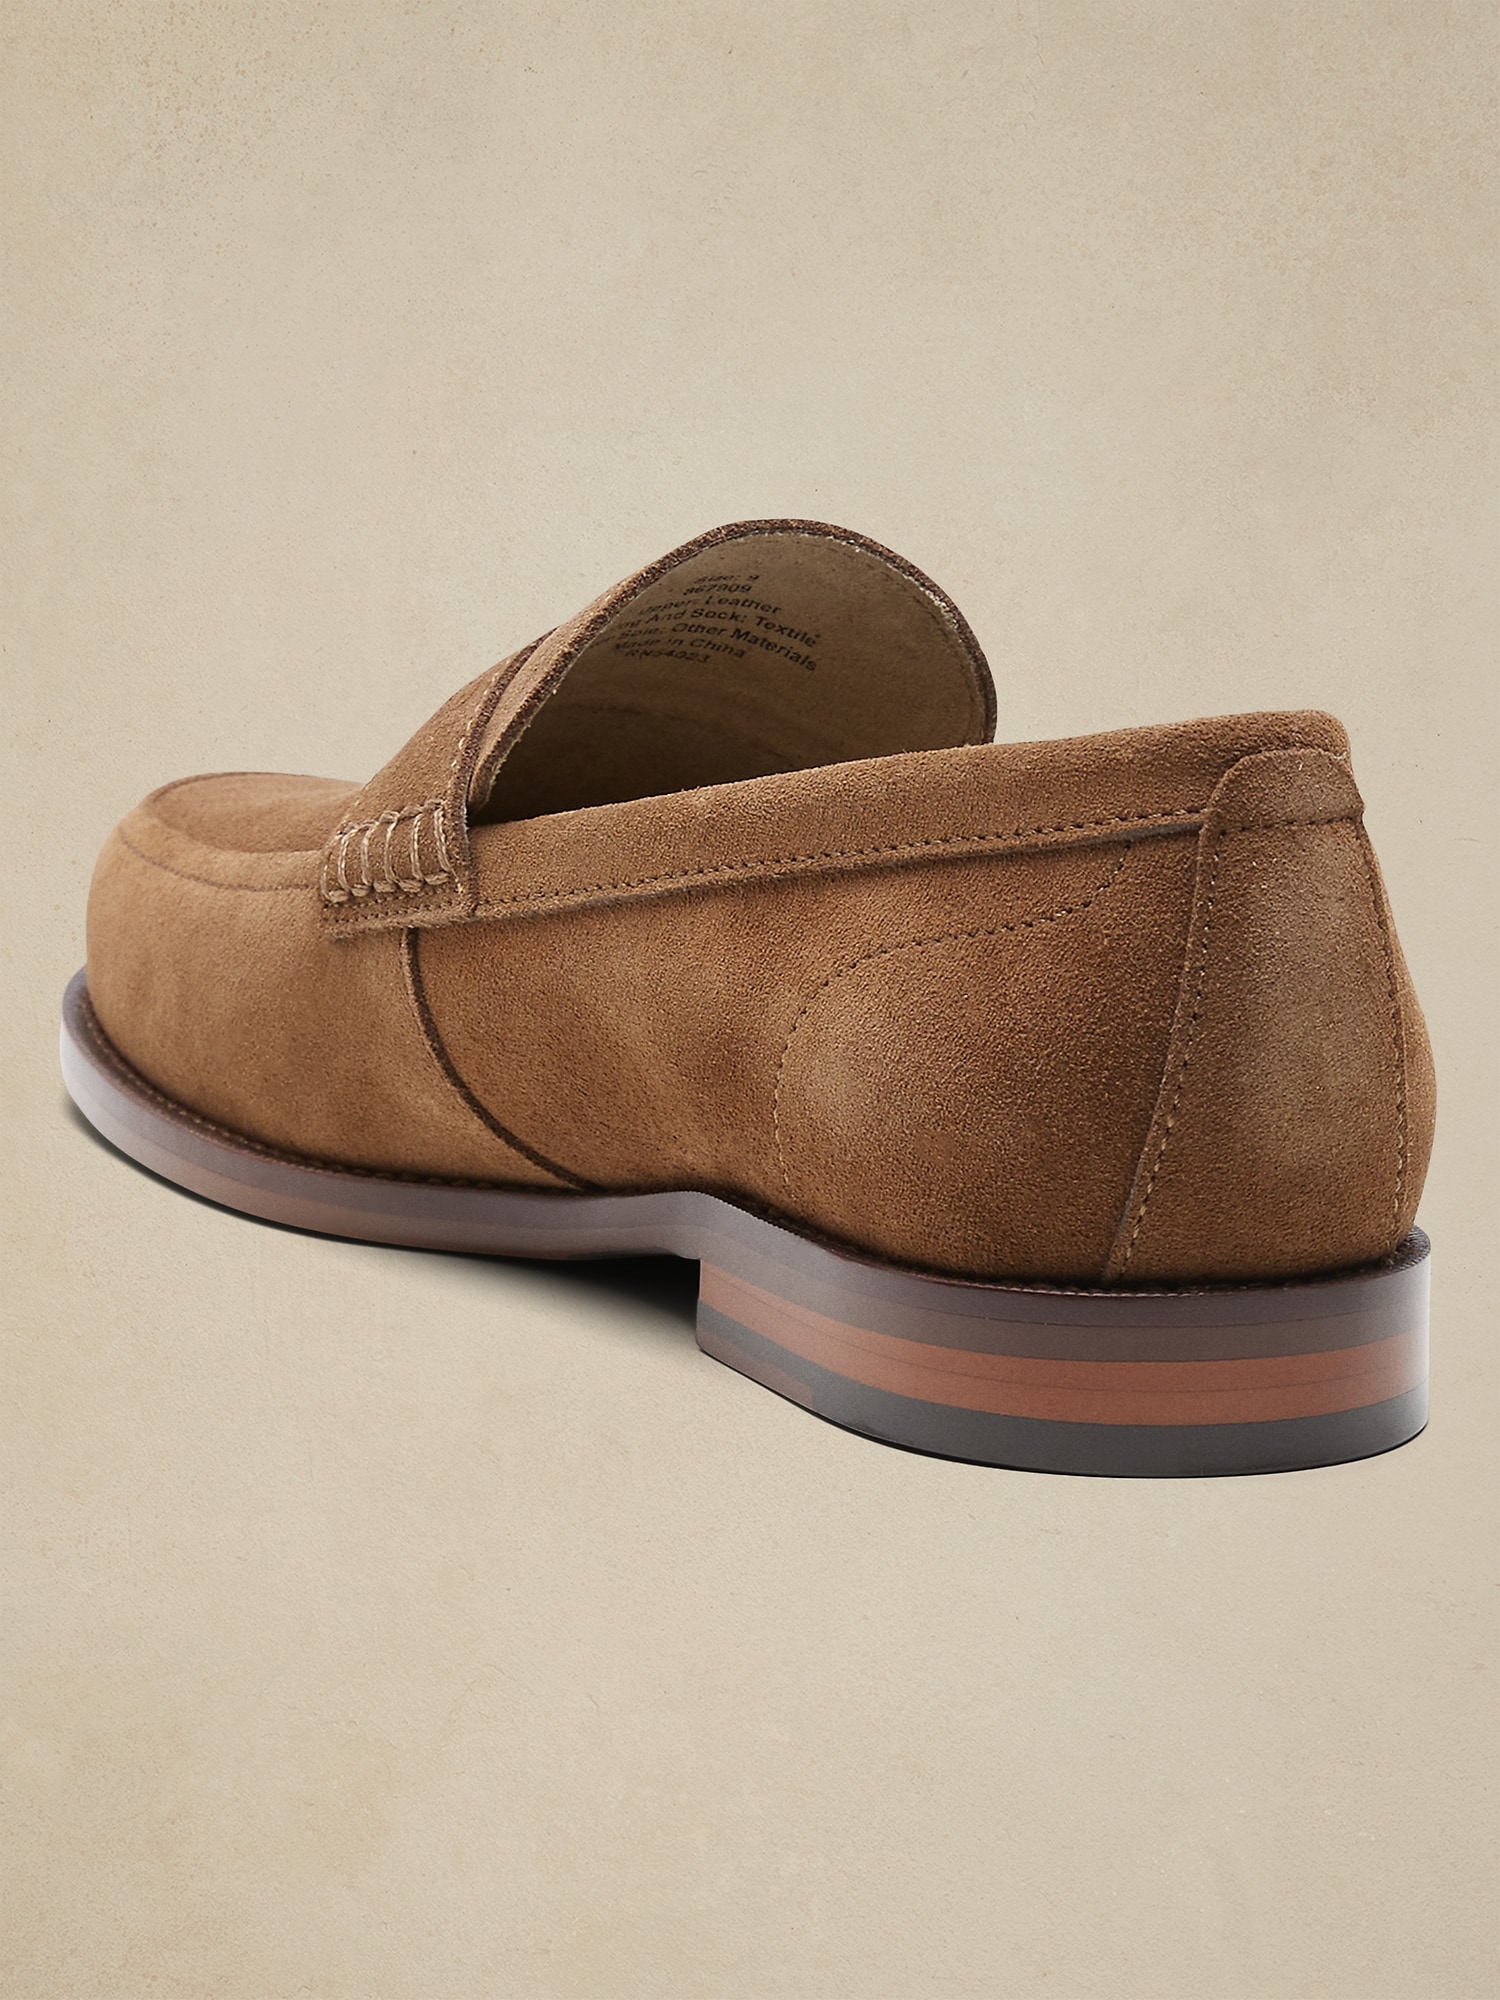 Suede Penny Loafer | Banana Republic Factory